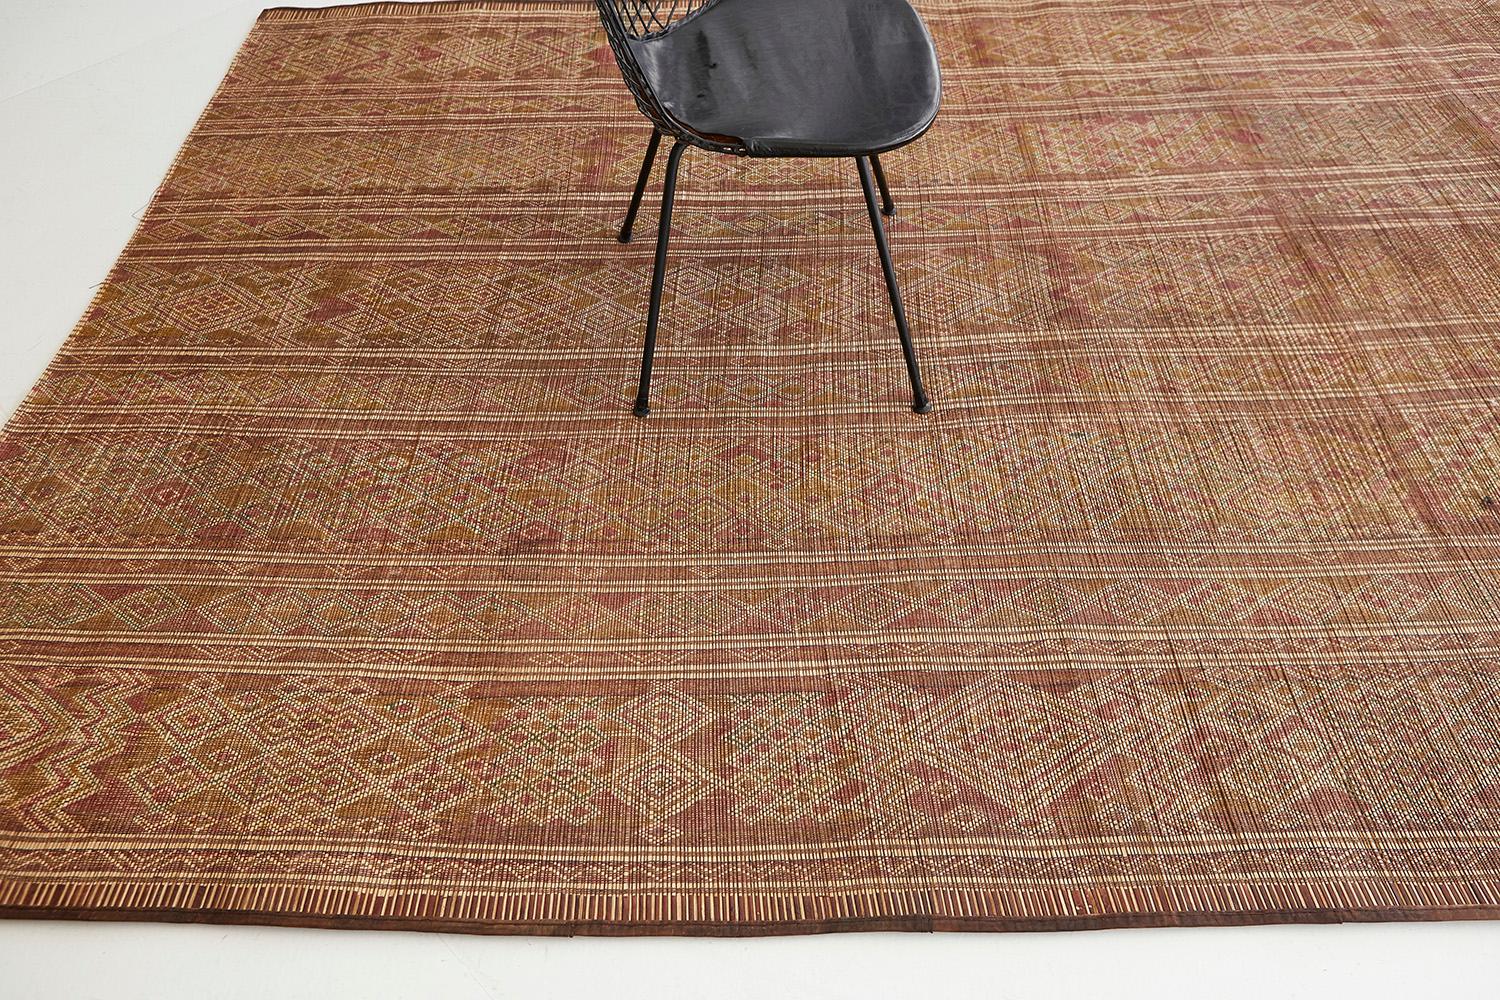 Preserving one's culture transferred to a rug is a story to tell. Natural schemes in diamond patterns, zigzag, and other ambiguous Berber symbols, are made out of reed and leather to make it last. Another masterpiece to add this up to your